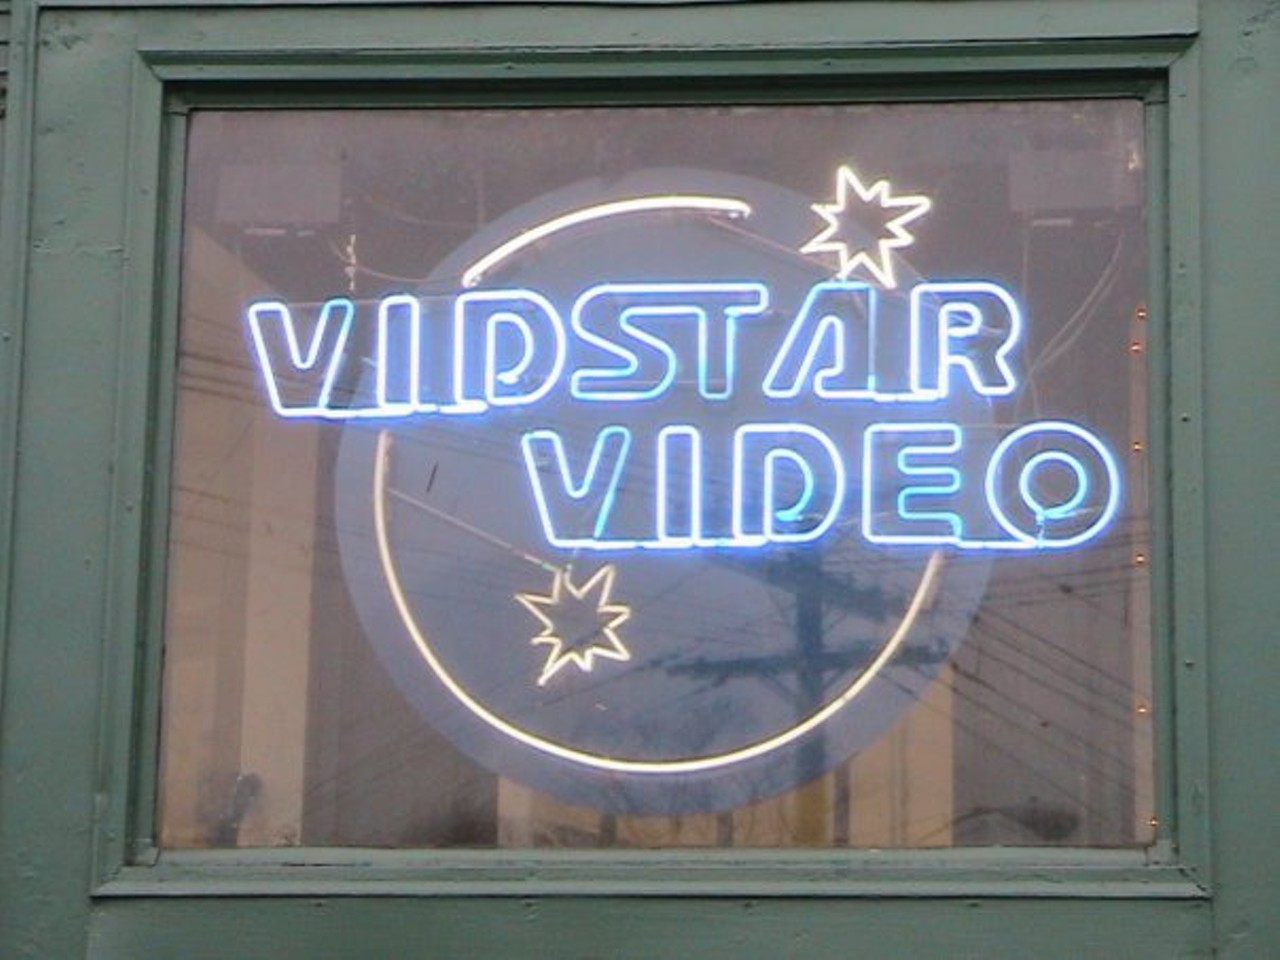  Vidstar
1836 Coventry Rd., Cleveland Heights
In 2009, after 26 years in Coventry Village in Cleveland Heights, Vidstar Video closed. At its peak, revenue hit close to $400,000 a year and the beloved store even survived the Blockbuster takeover of America, but was eventually squeezed out by streaming. What we would give for one more stroll through the eclectic collection and one more rec from a staffer.